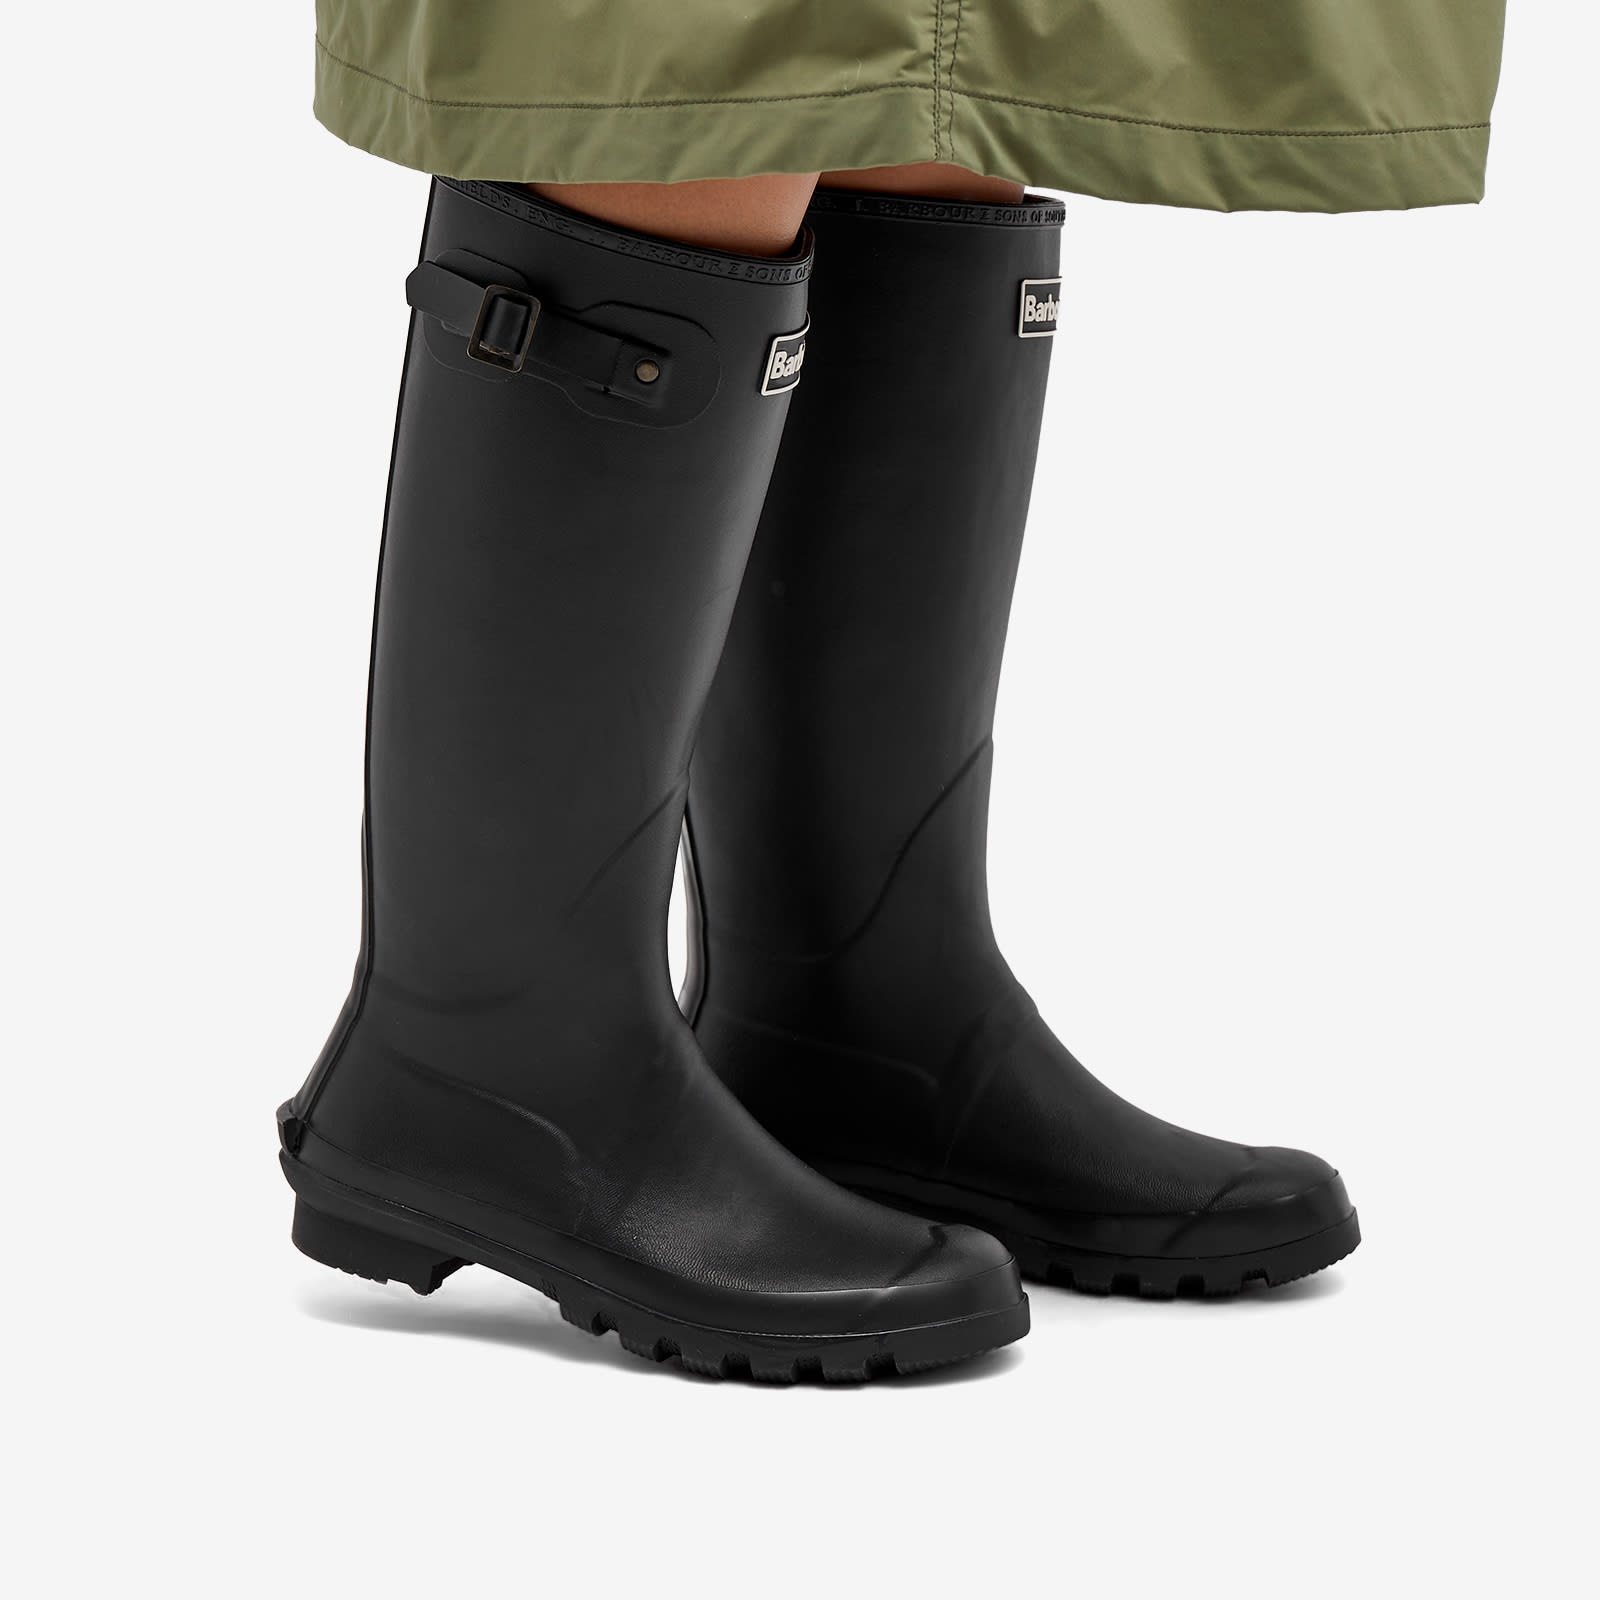 Barbour Bede Wellie Boots - 6